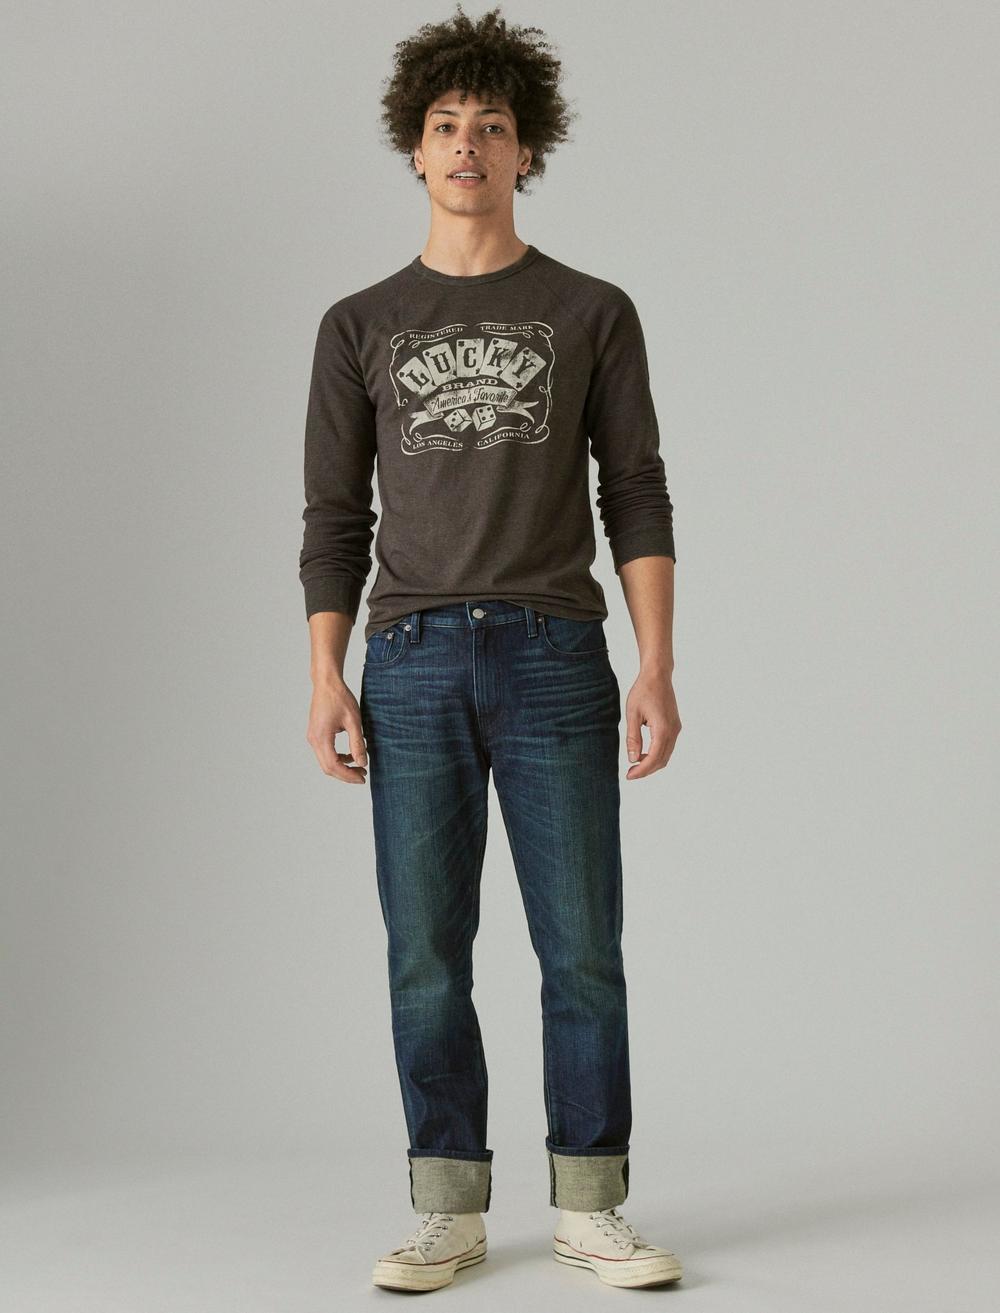 LUCKY BRAND THERMAL, image 2